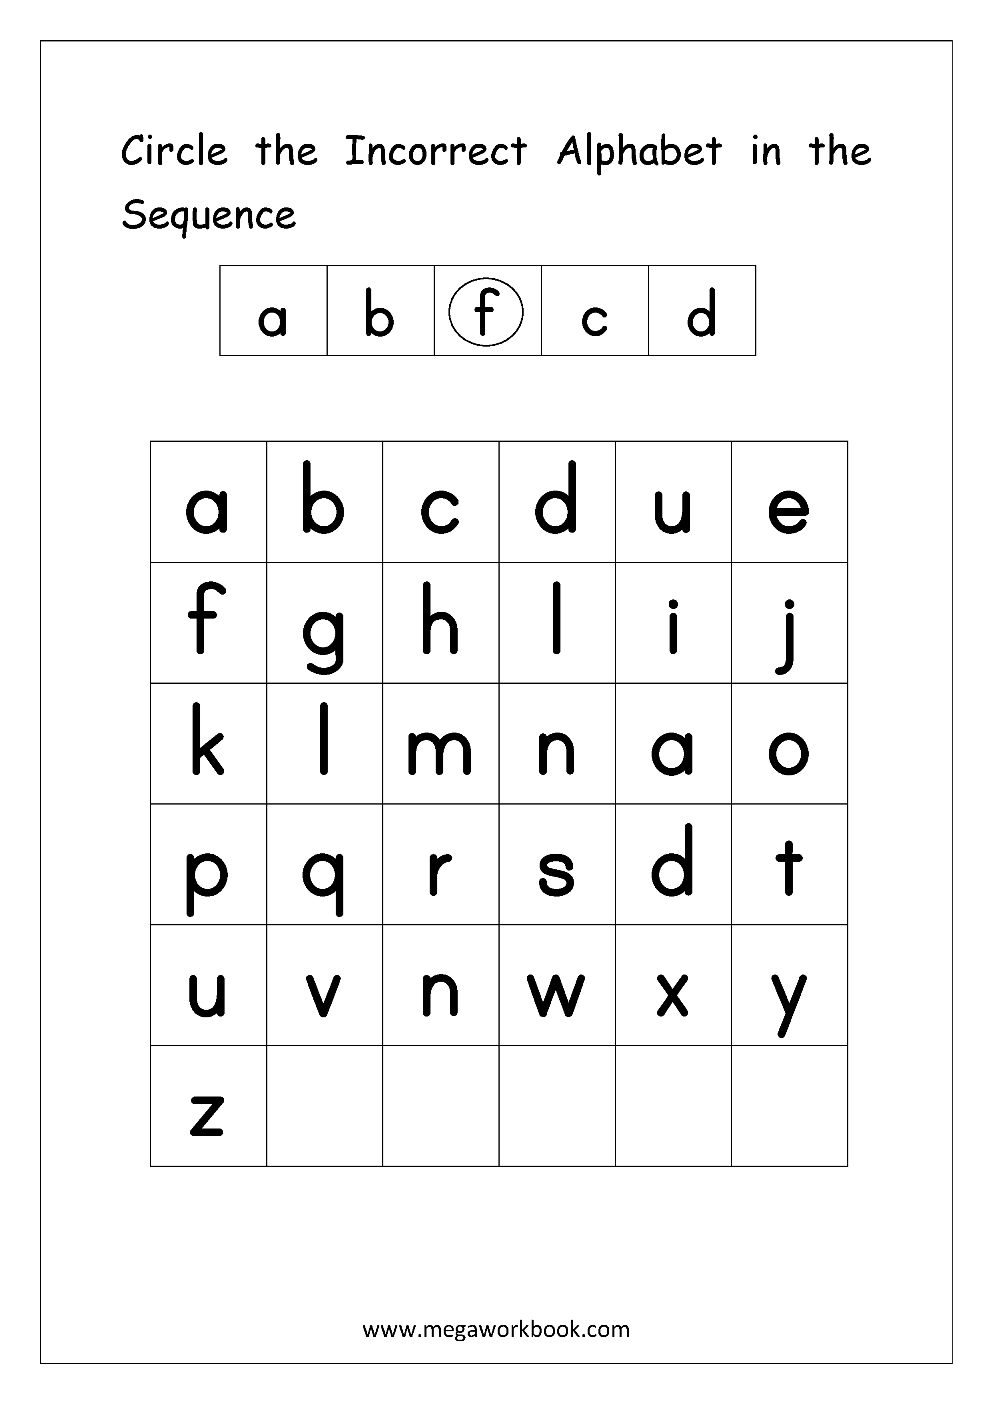 Free English Worksheets - Alphabetical Sequence - Alphabetical Order